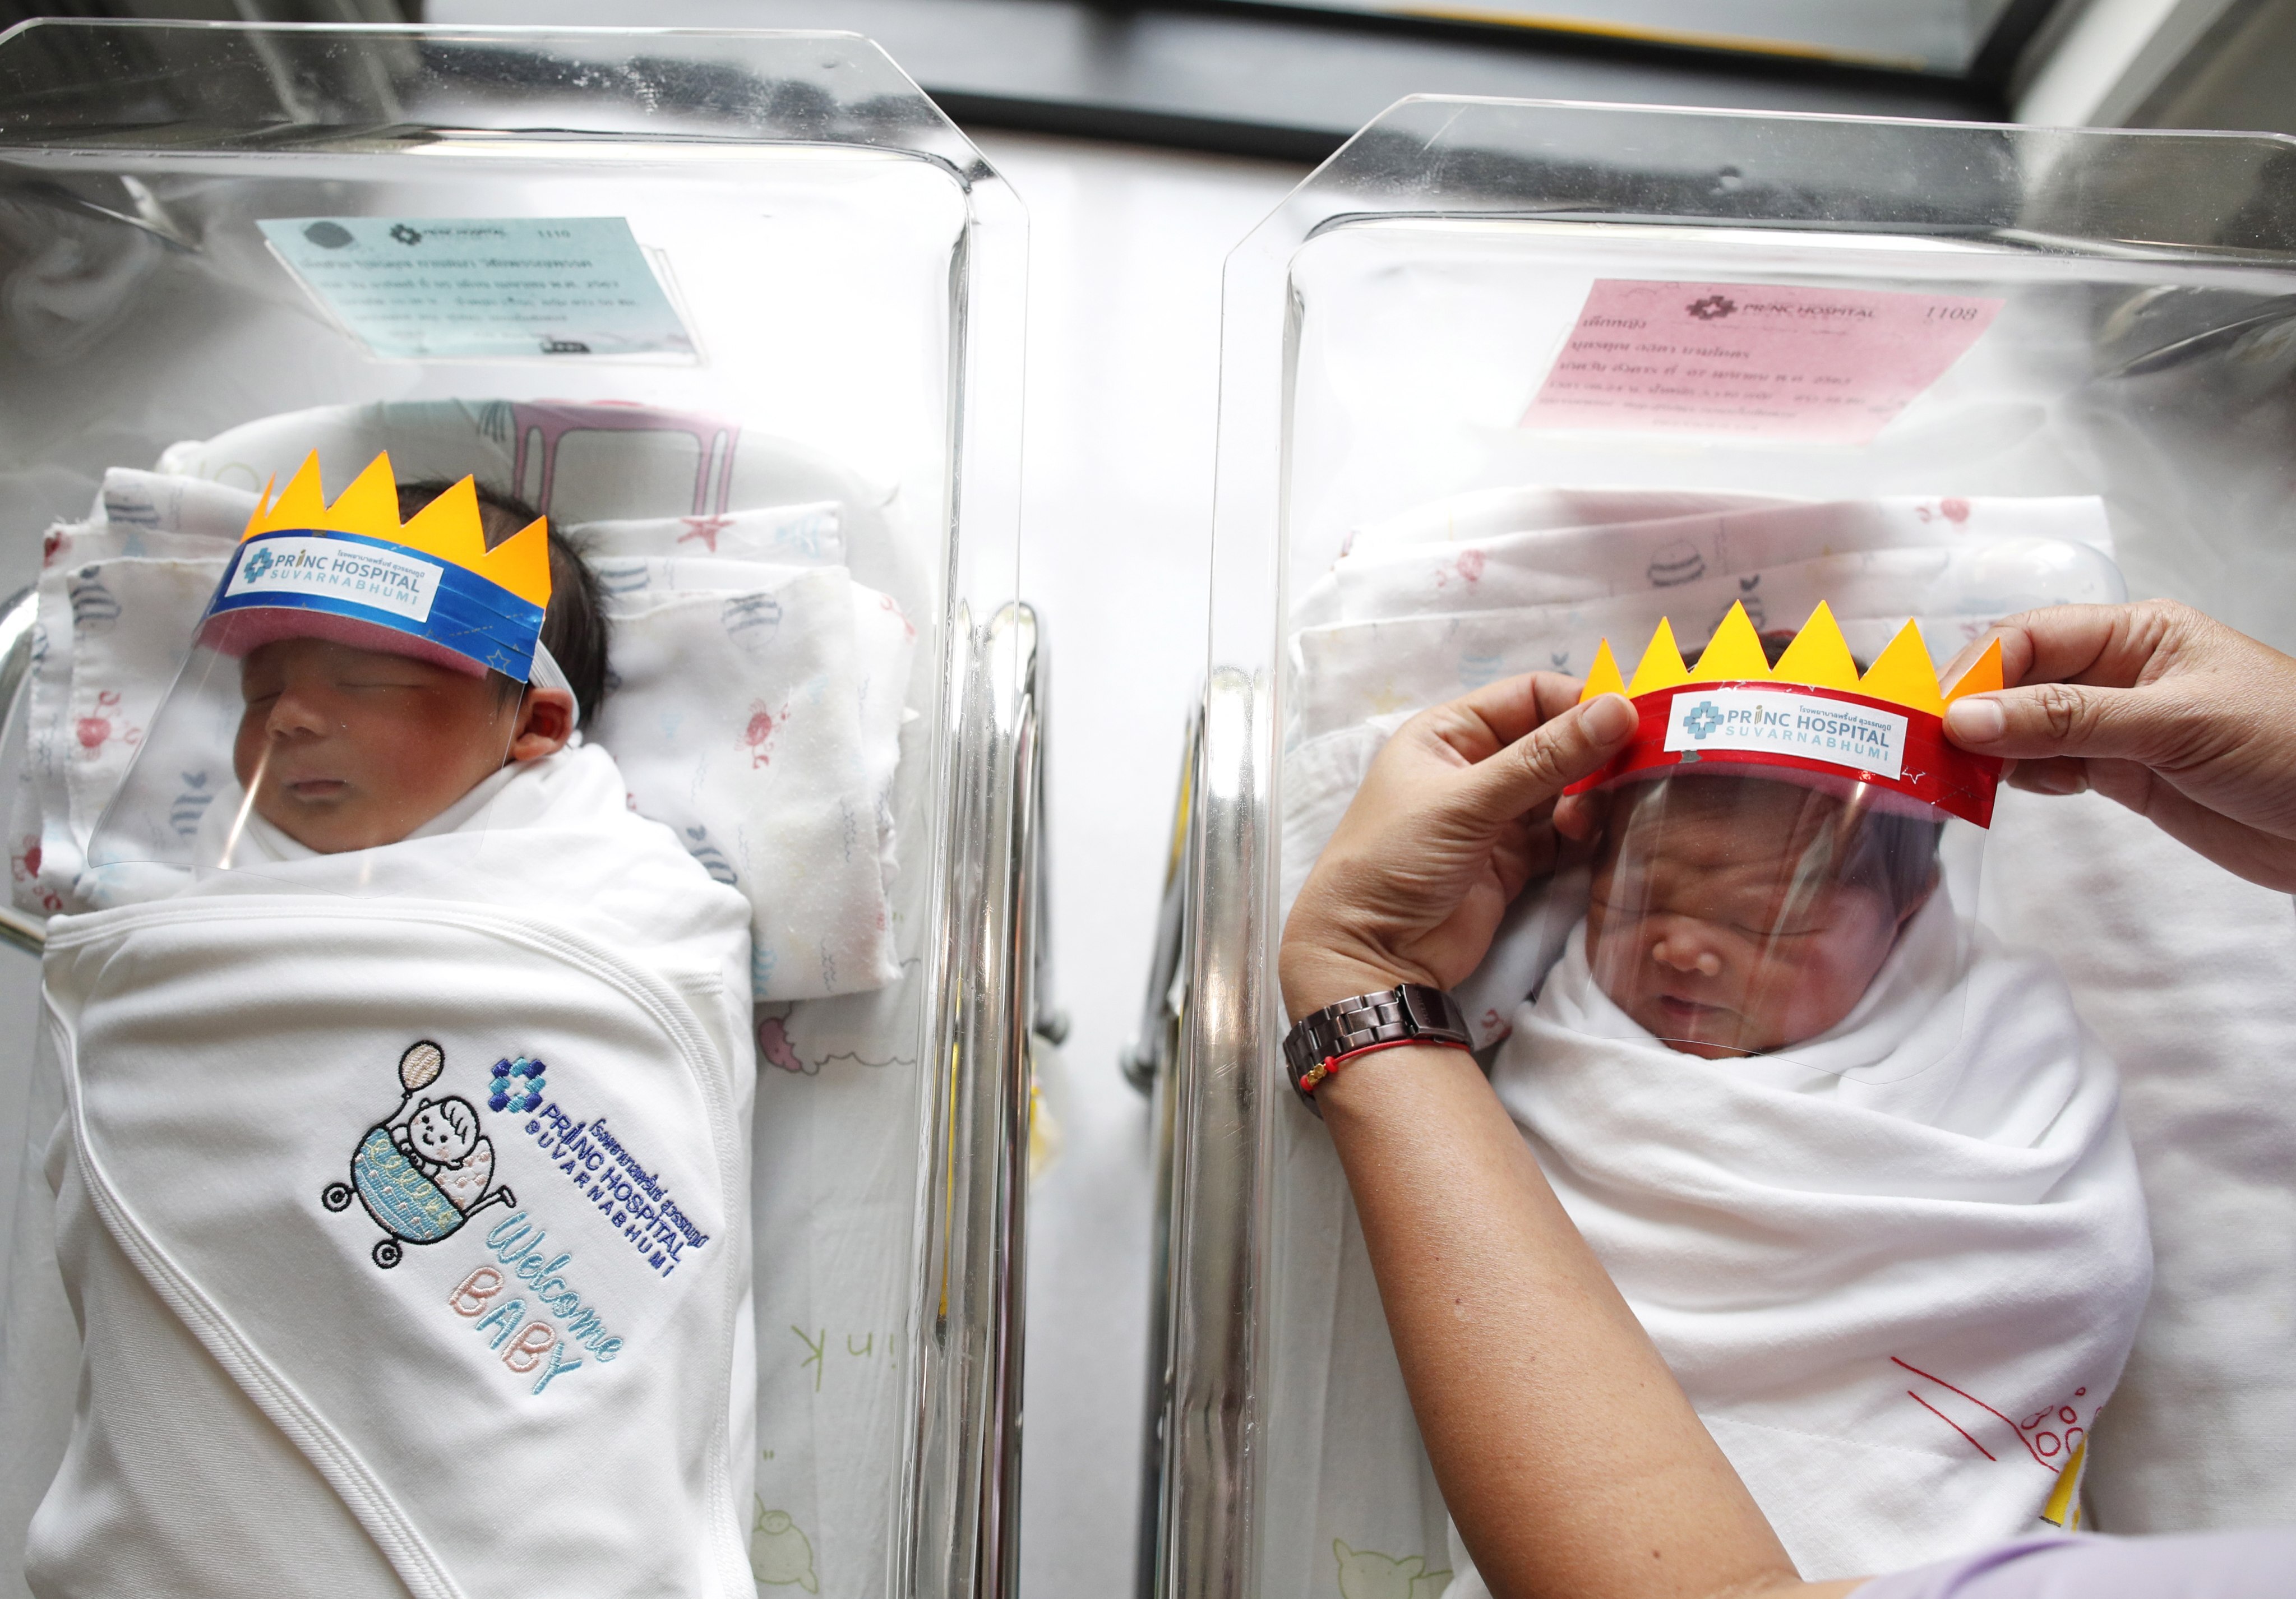 A Thai nurse puts face shields on newborn babies as a precaution against the coronavirus, at the Princ Hospital Suvarnabhumi in Samut Prakan province, Thailand, on April 8, 2020. Pregnant women have been among the most vulnerable yet under-reported groups during the pandemic. Photo: EPA-EFE